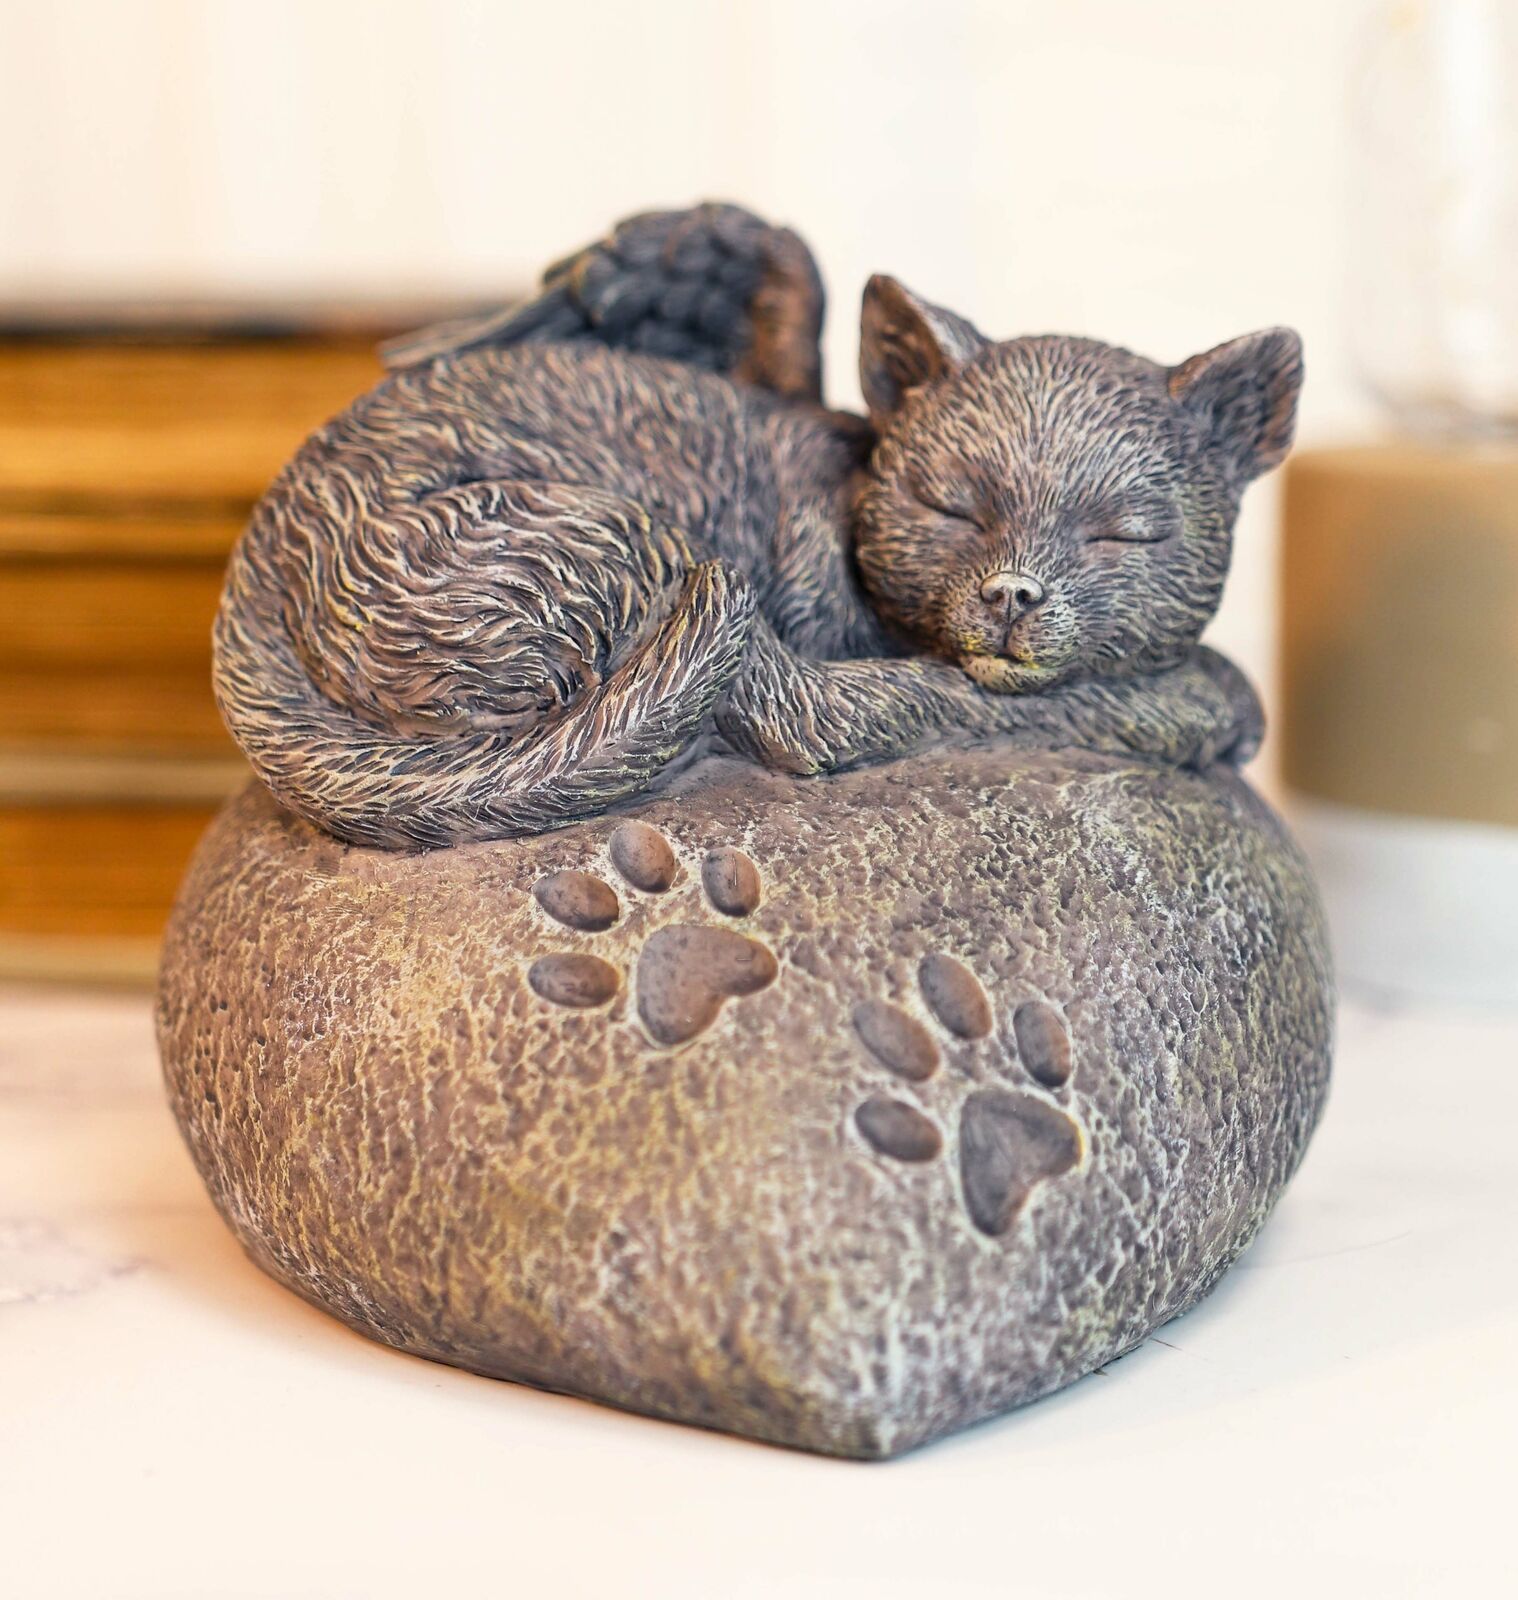 Pet Memorial Sleeping Angel Cat With Paw Prints Heart Shaped Rock Urn Statue